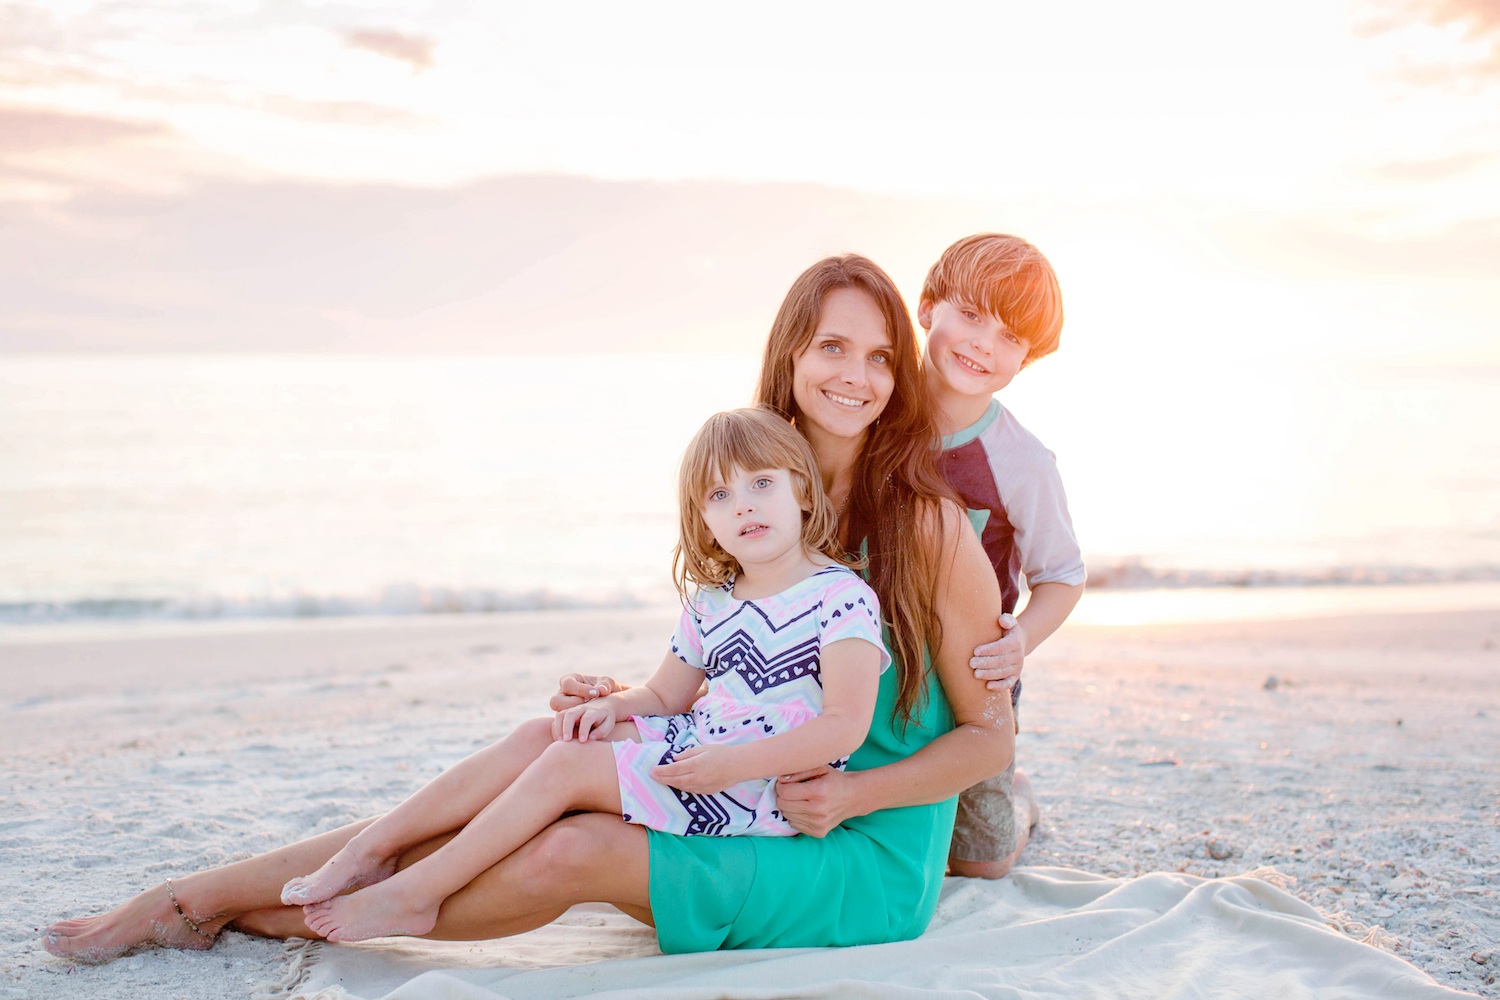 Tips for Mommy and Me Photos | Family photo tips | Family beach photos | SWFL Family Photographer Ashley Danielle | Acupful.com | SWFL beach photo sessions | Florida family photographer | successful photo shoot with kids